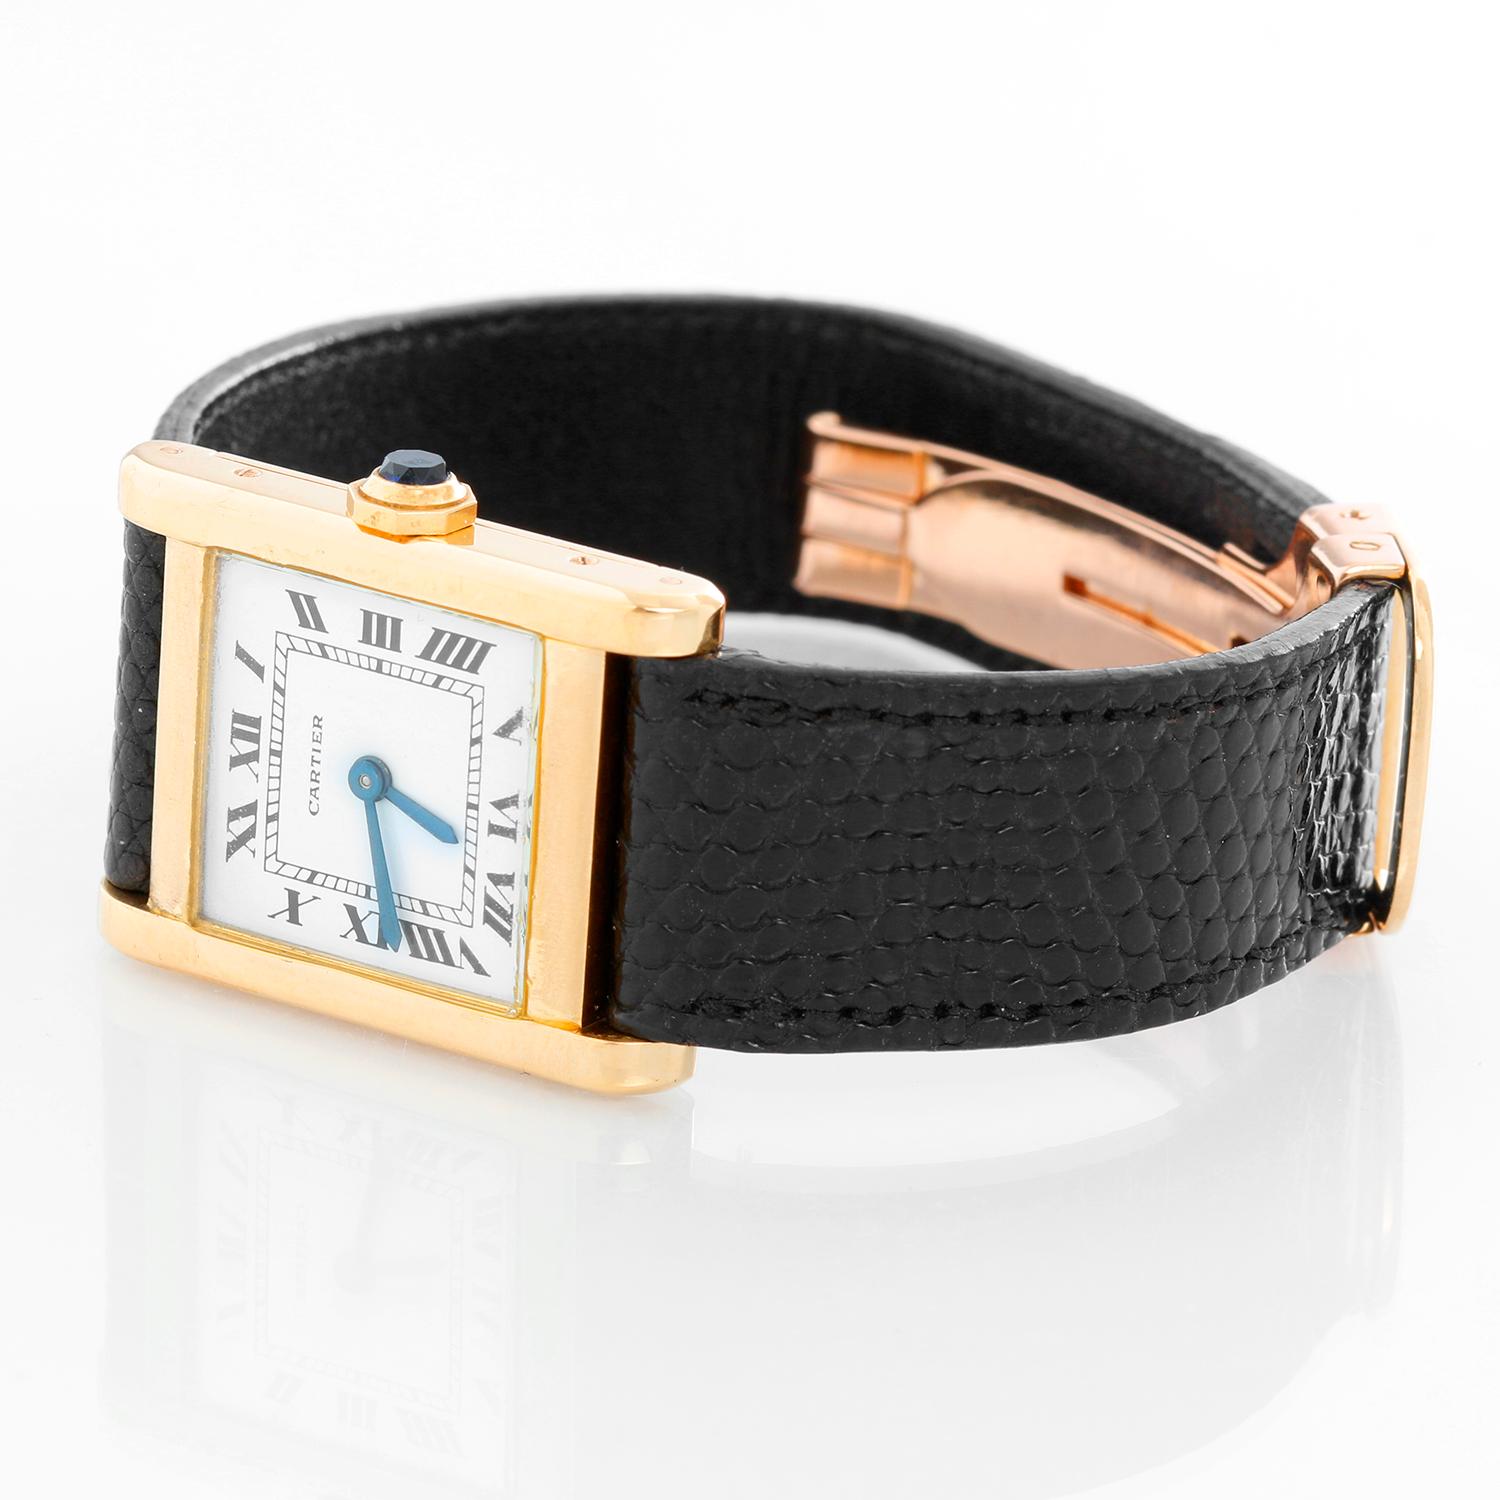 Cartier Tank 18K Yellow Gold Men's Watch  - Manual winding . 18K yellow gold ( 22 x 30 mm) . White dial with Roman numerals . Black alligator strap with Cartier deployant buckle . Pre-owned with custom box .